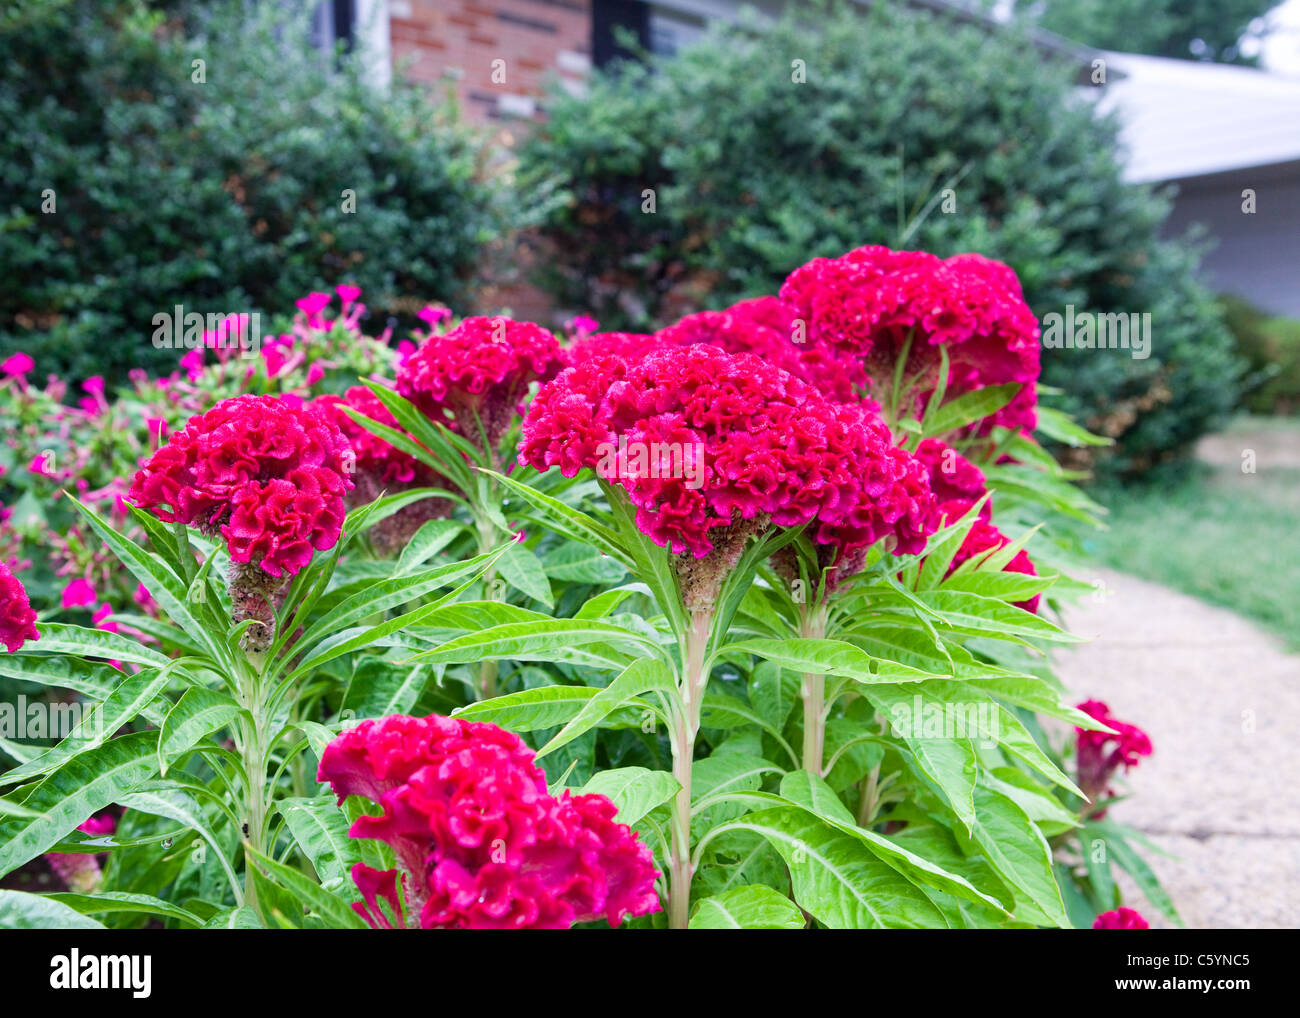 Plumed cockscomb (Celosia argentea) flowers in front of house Stock Photo